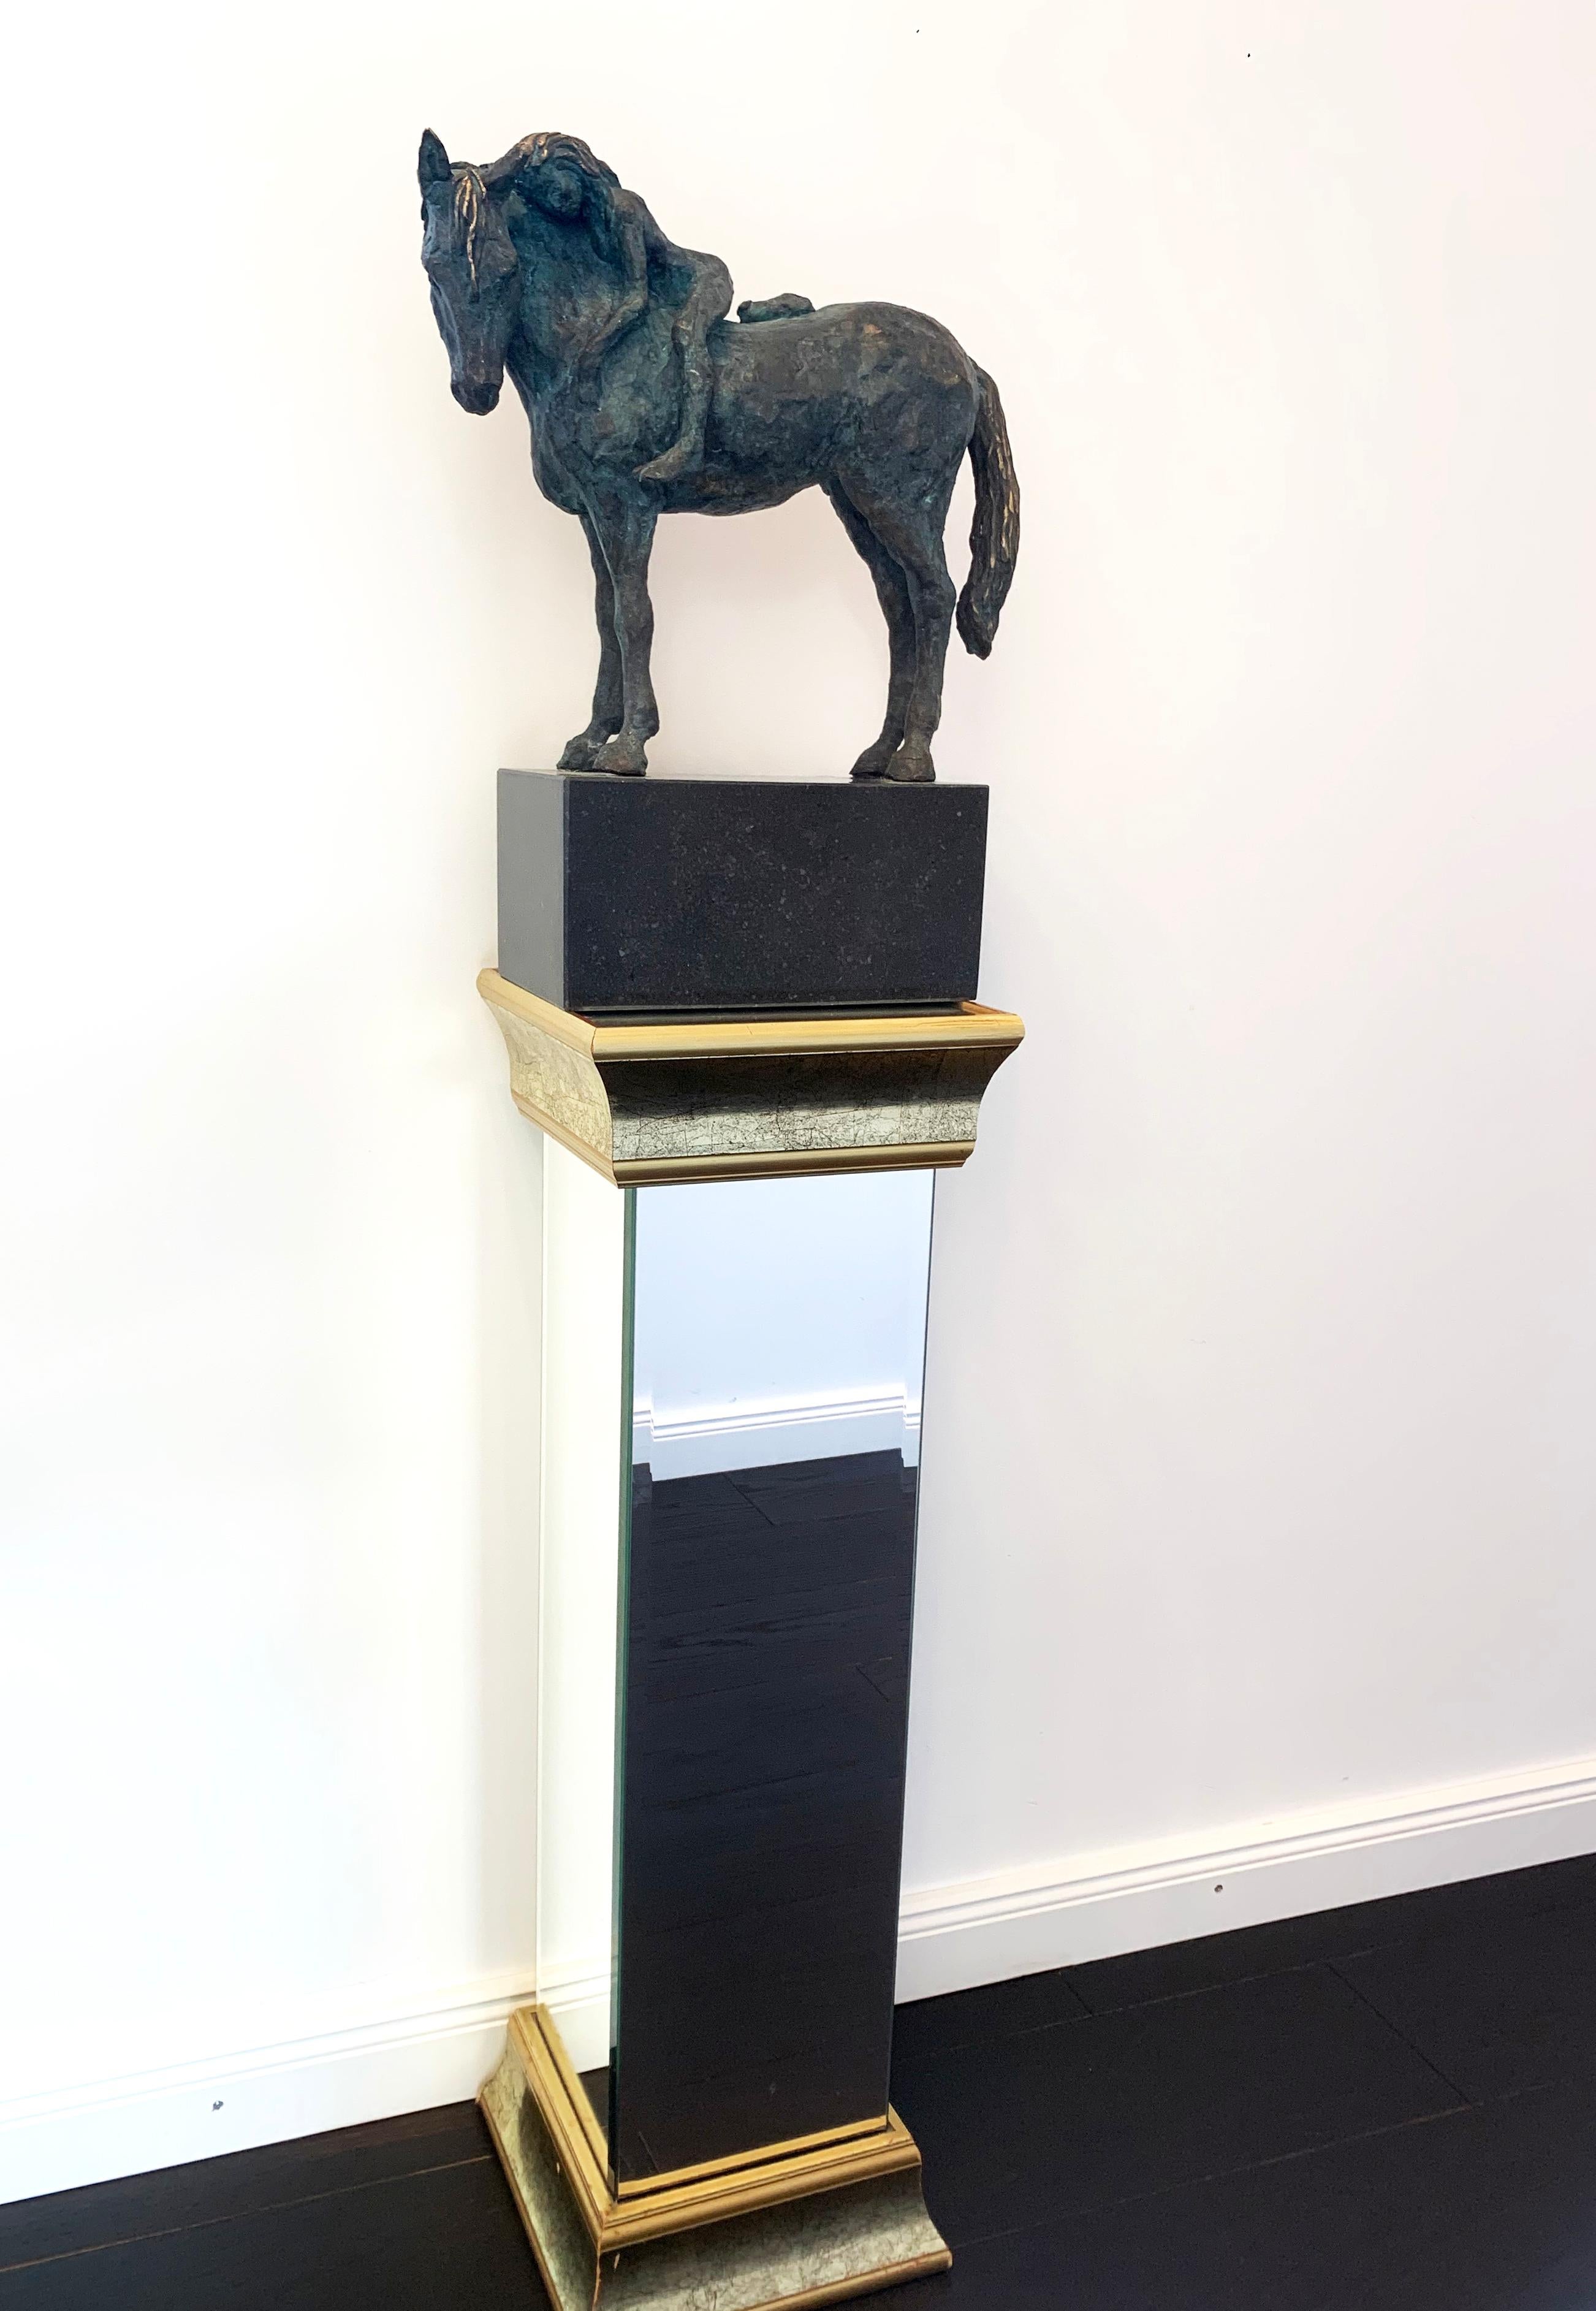 Bronze sculpture of a horse carrying a woman - The sculpture portrays the love and intimate harmony between horse and girl.

About the Gallery:
Folly and Muse was established in 2015 in London to find and collaborate with the most creative,